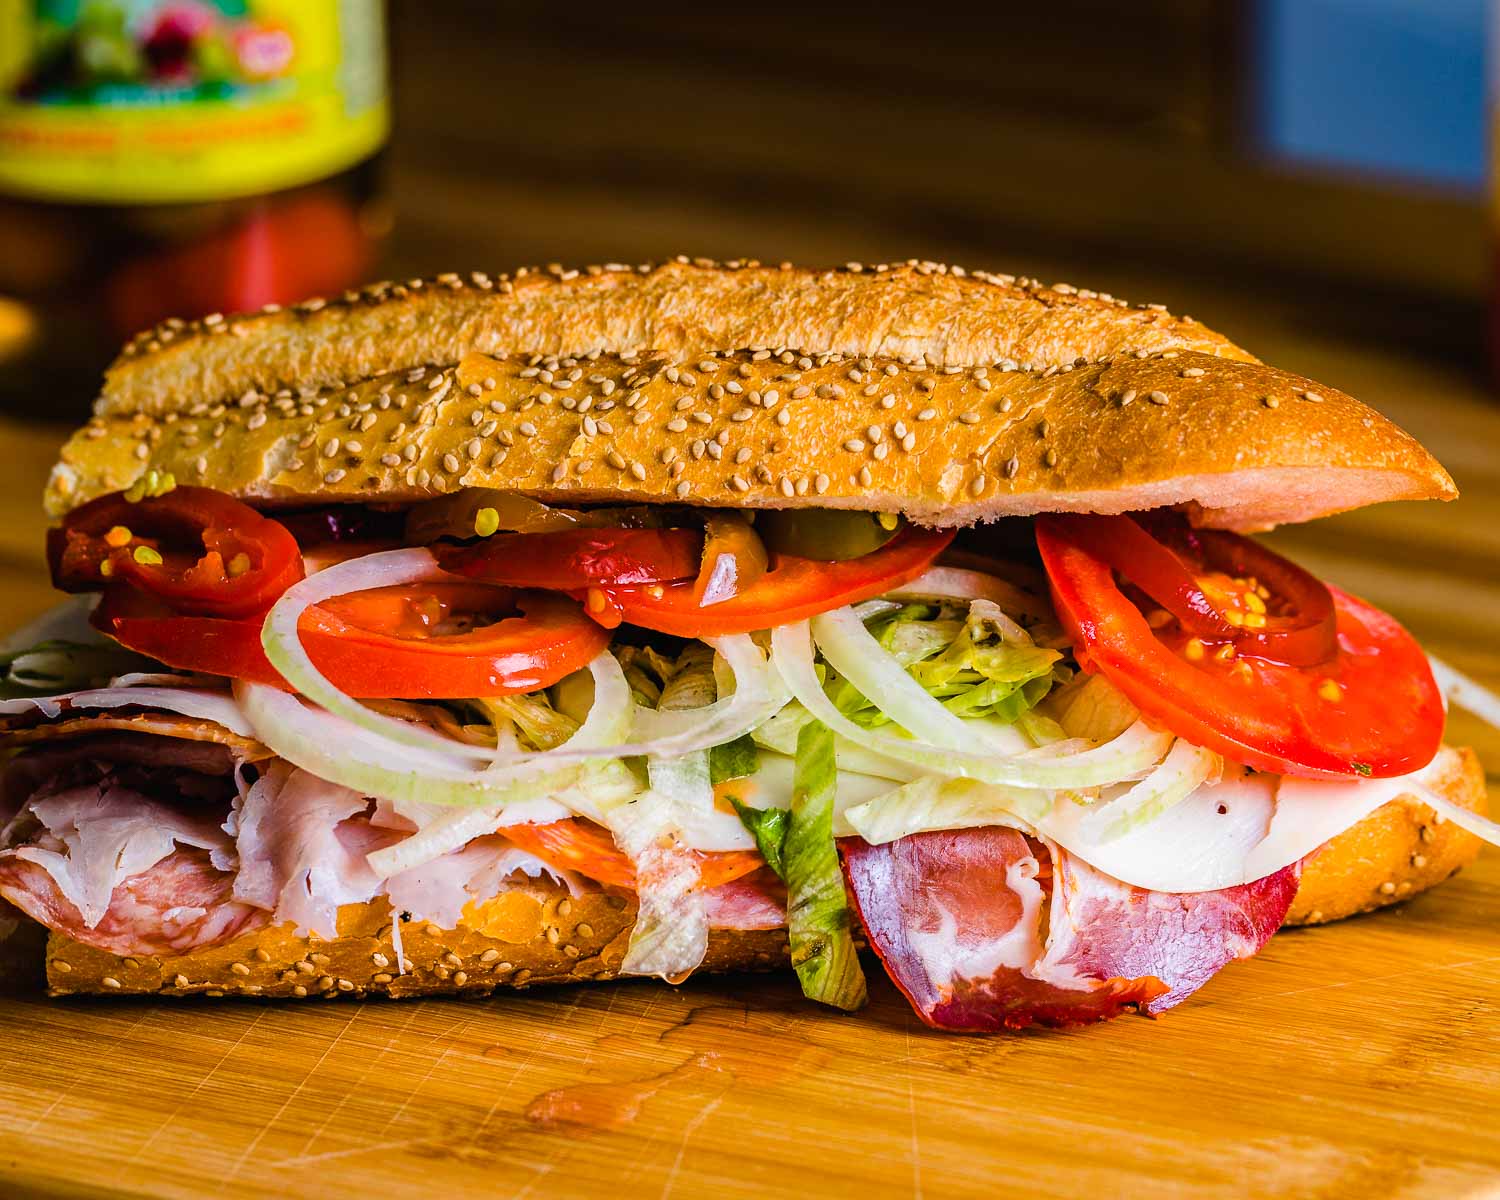 Italian sub on seeded roll with lettuce, tomato, cherry peppers, and onions showing.